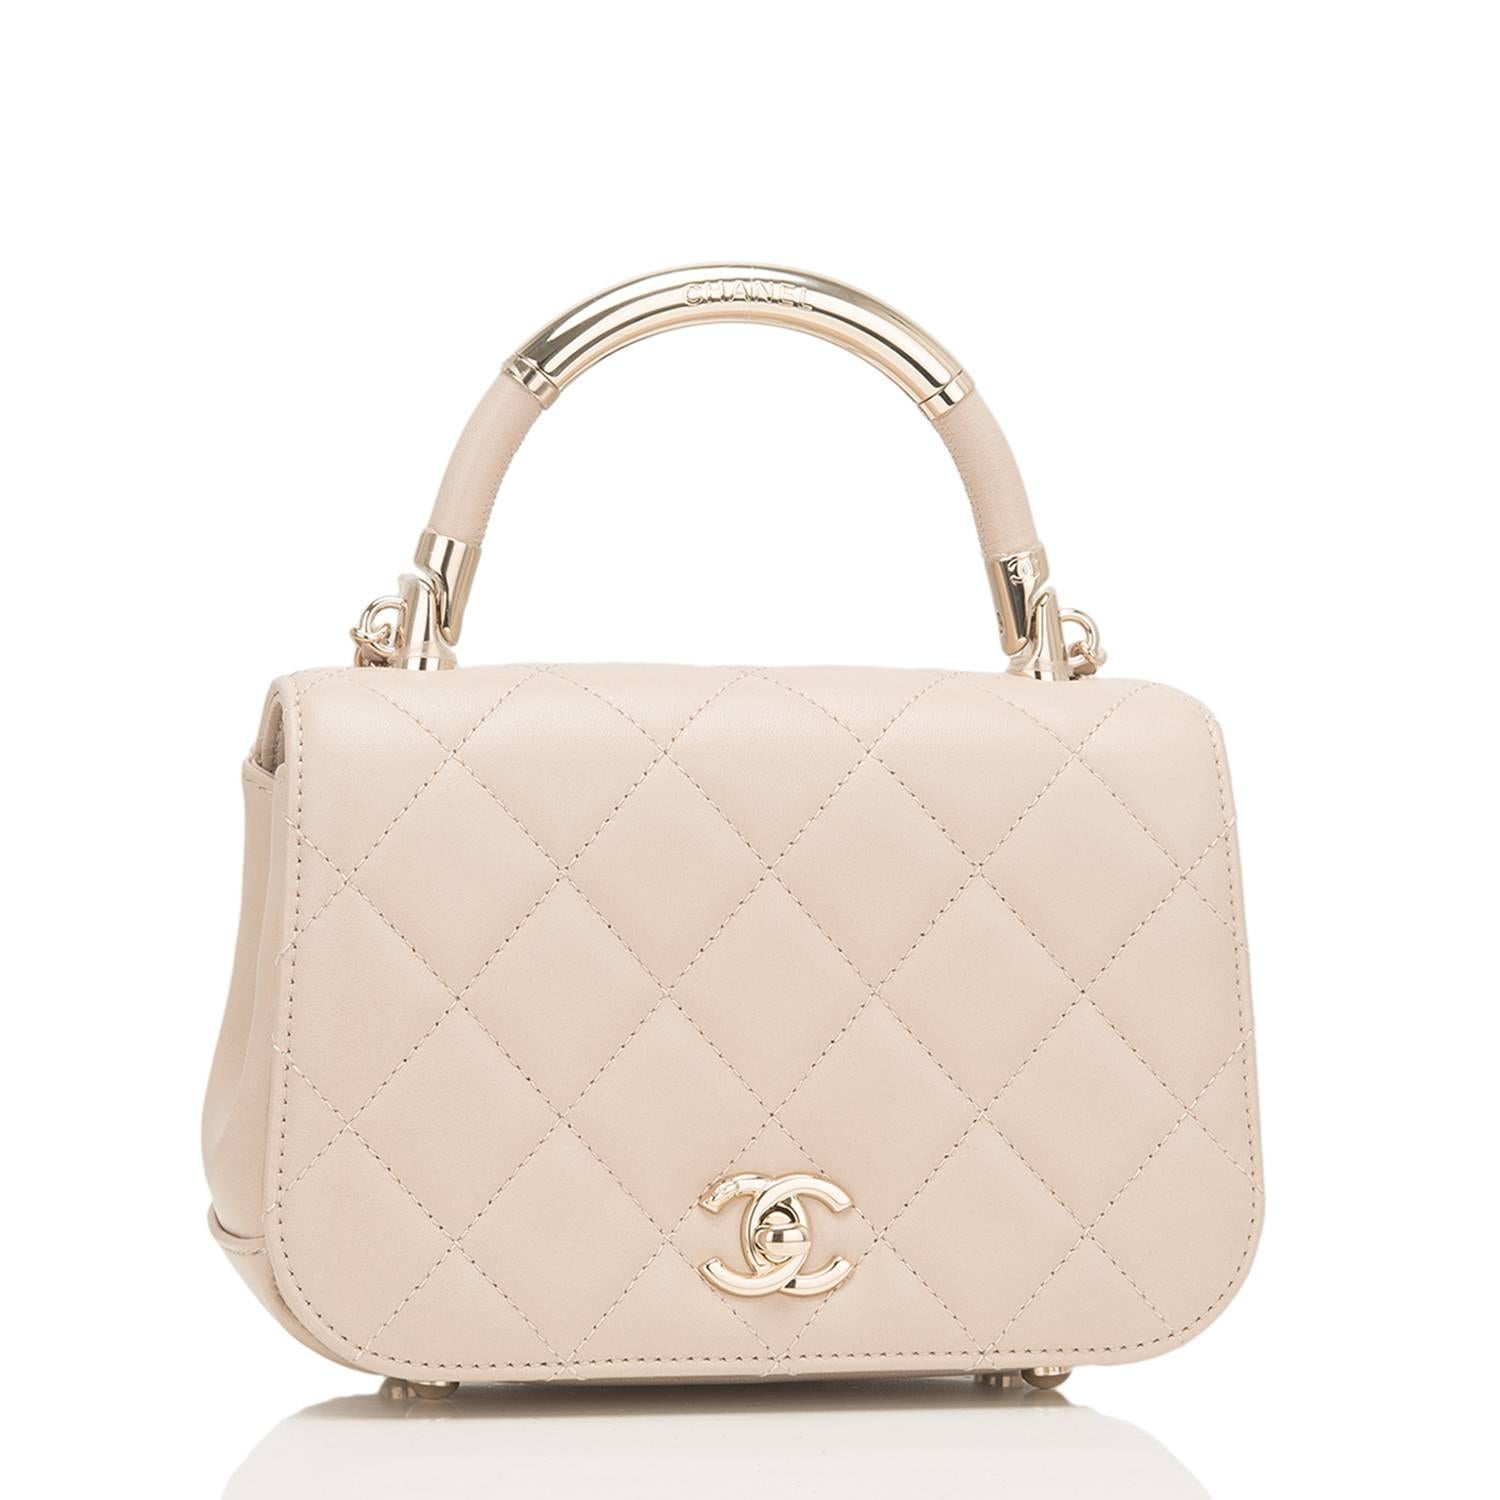 Chanel Carry Chic bag of beige quilted lambskin leather with gold tone hardware.

This limited edition bag features a front flap with CC turnlock closure, back pocket, interwoven beige leather and gold tone chain with shoulder pad and a single